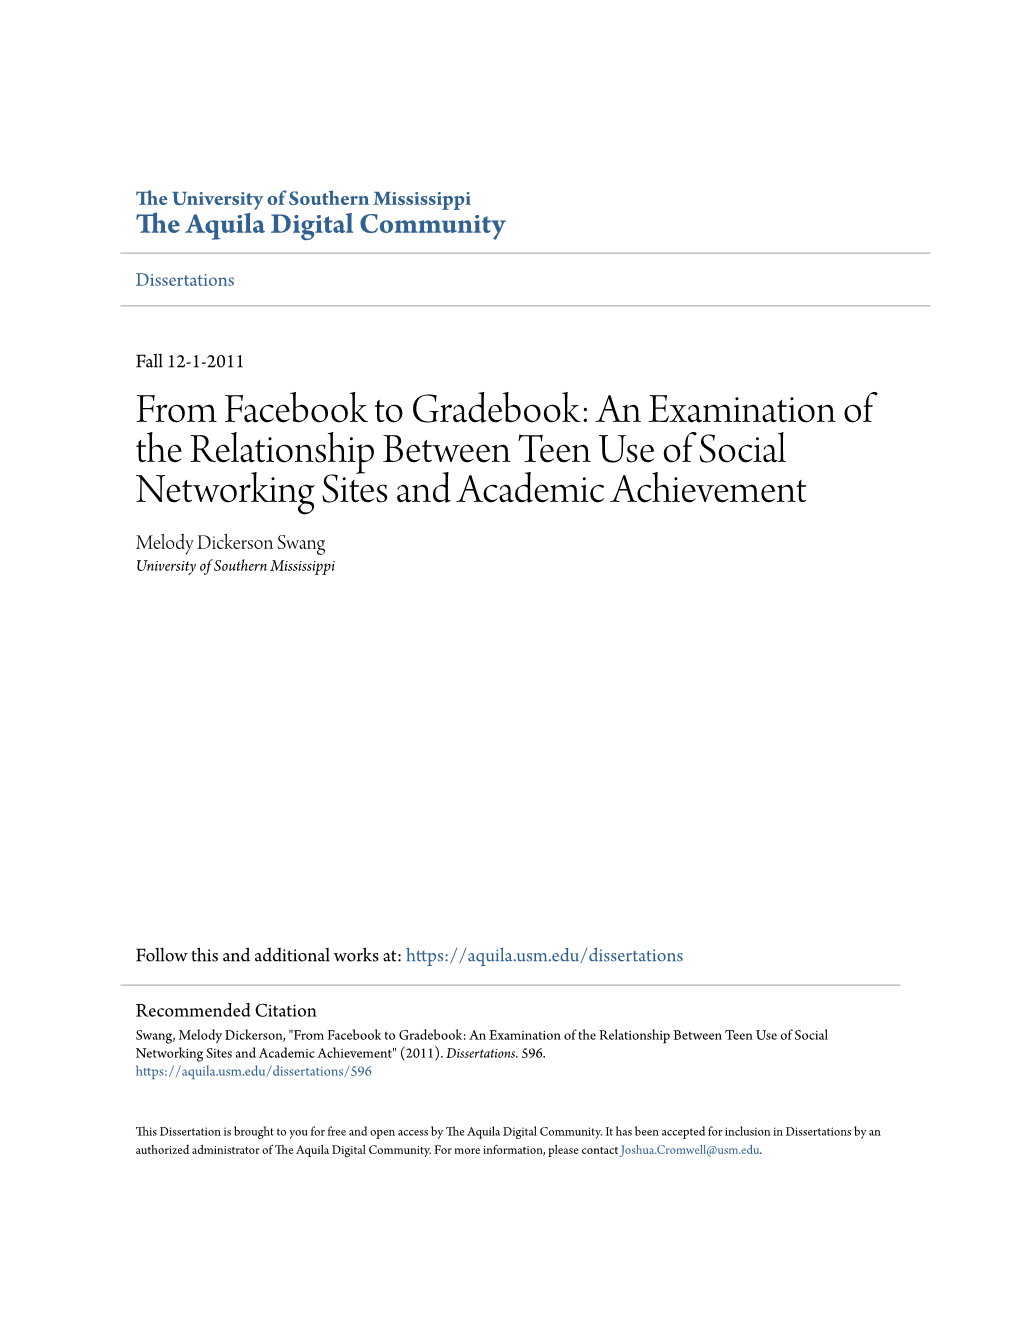 An Examination of the Relationship Between Teen Use of Social Networking Sites and Academic Achievement Melody Dickerson Swang University of Southern Mississippi